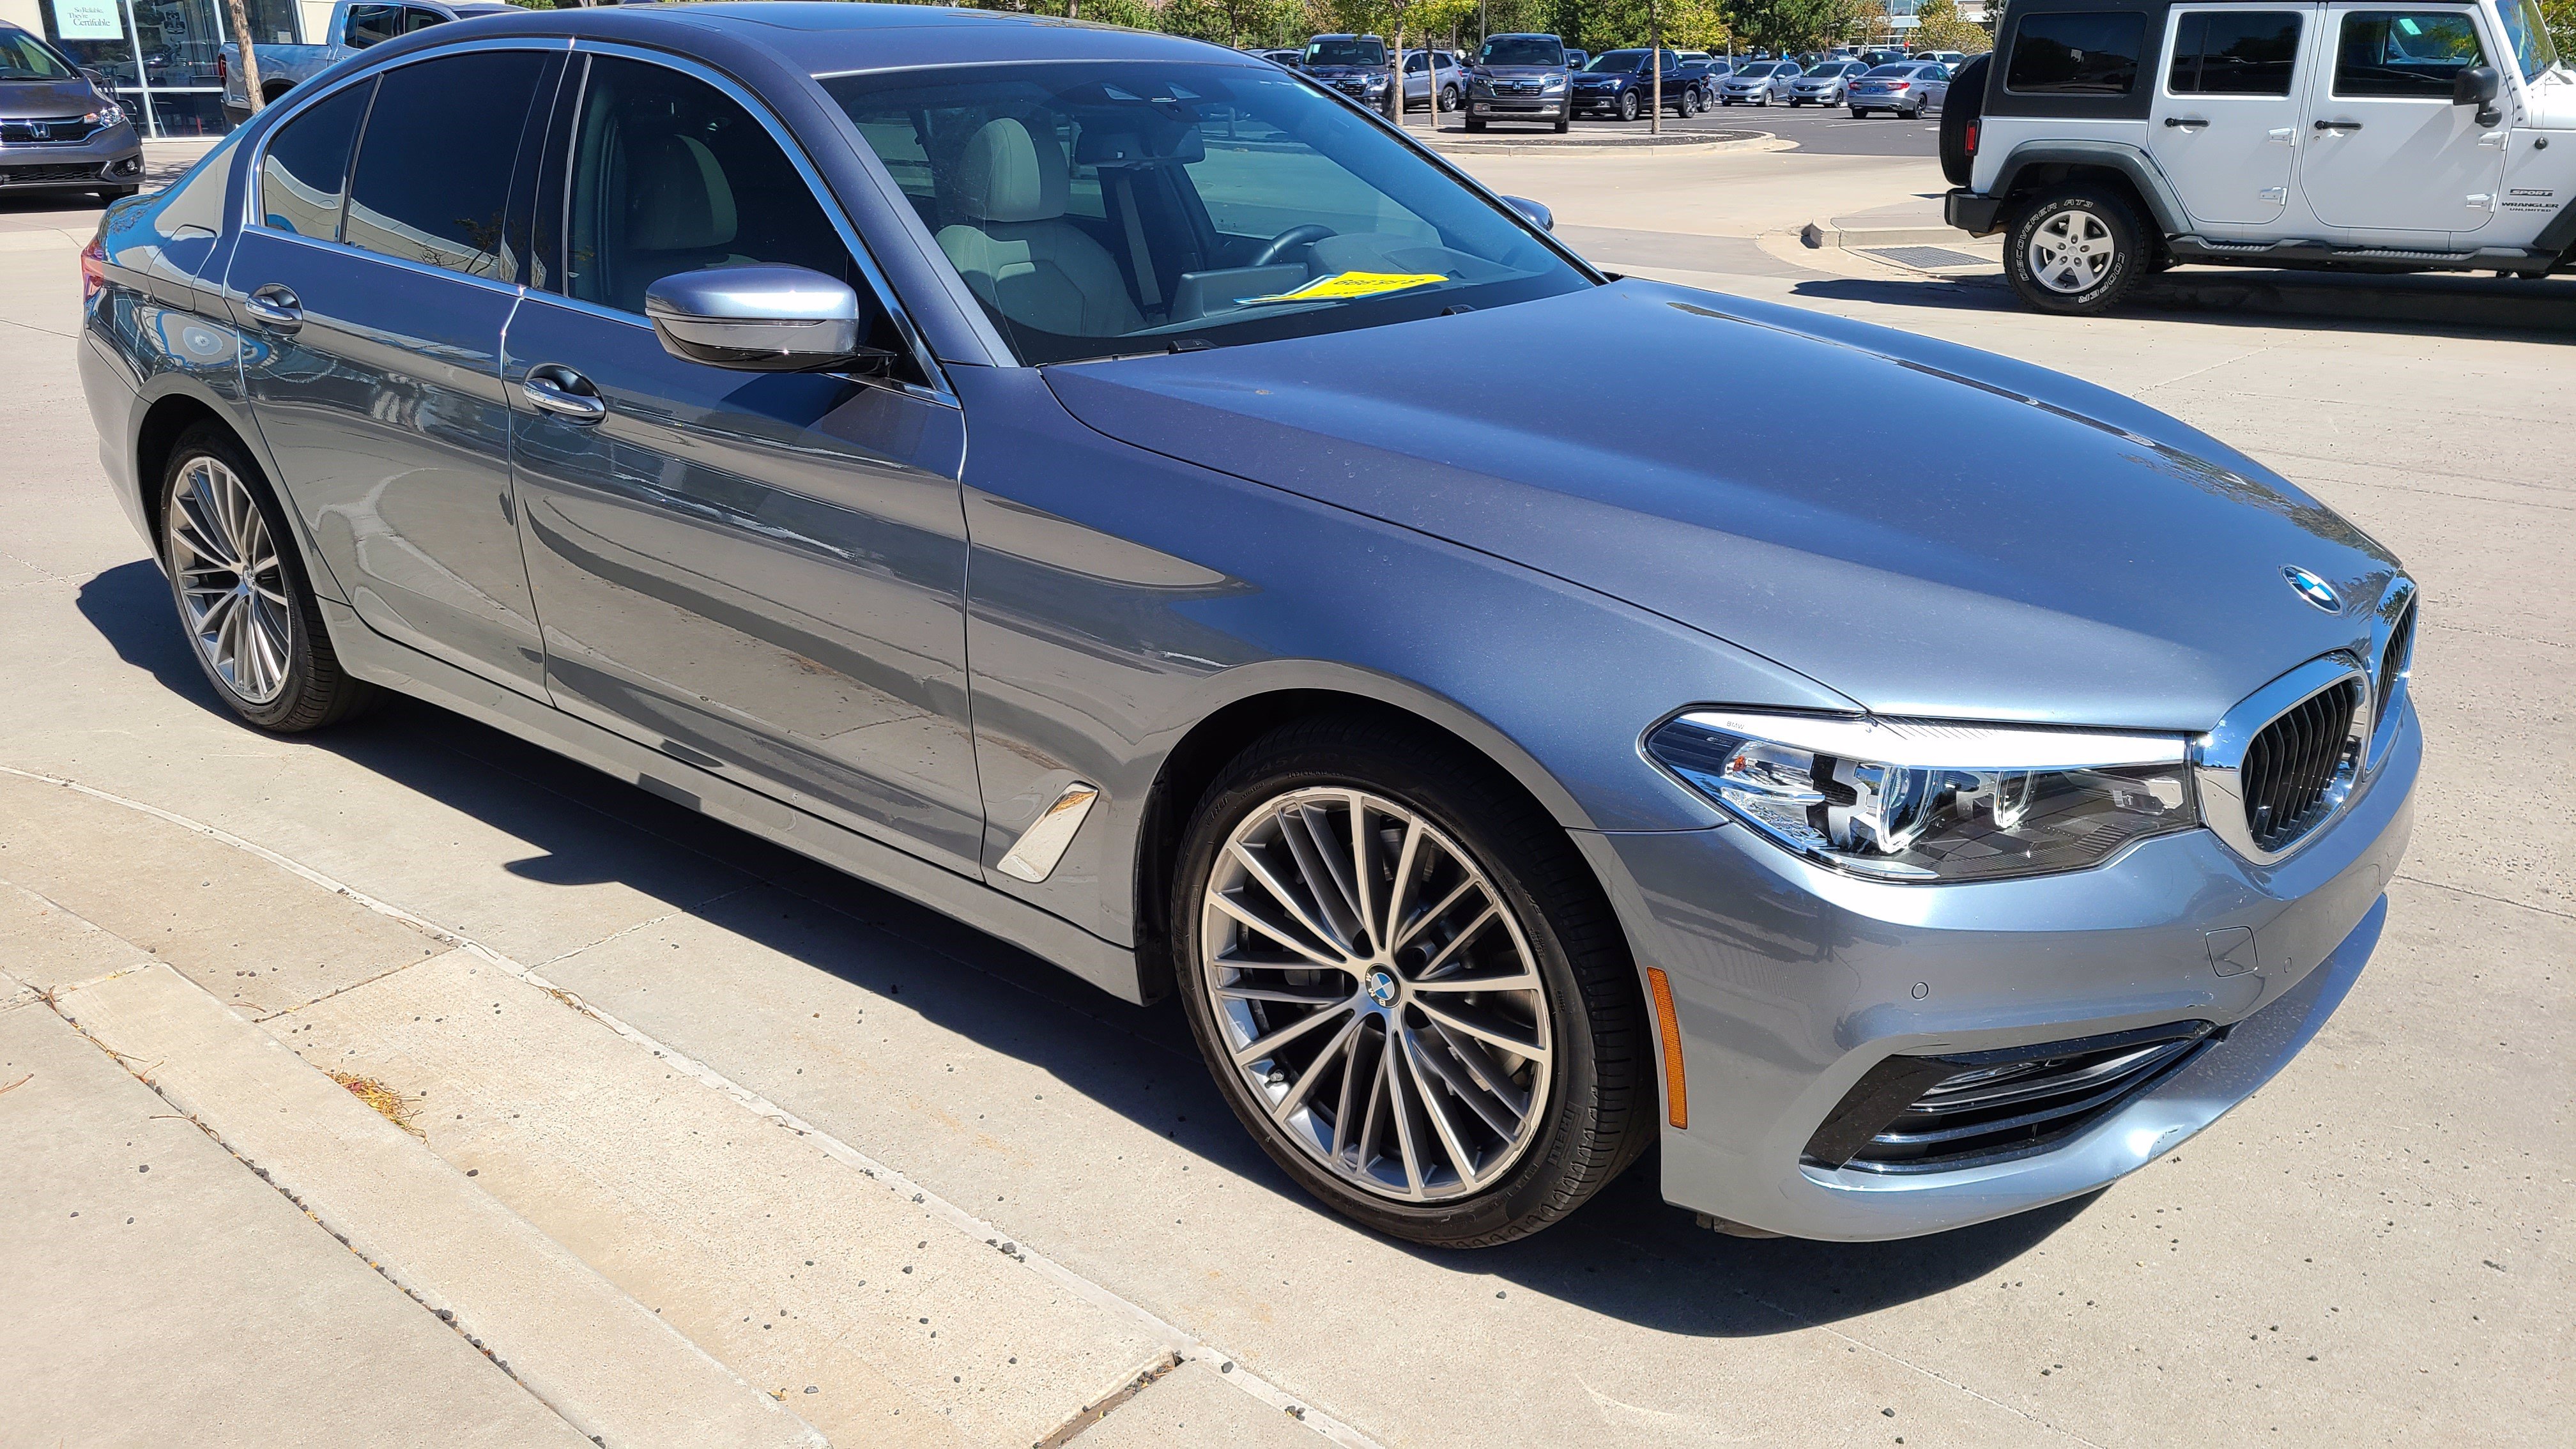 PreOwned 2018 BMW 5 Series 530i 4dr Car in Flagstaff